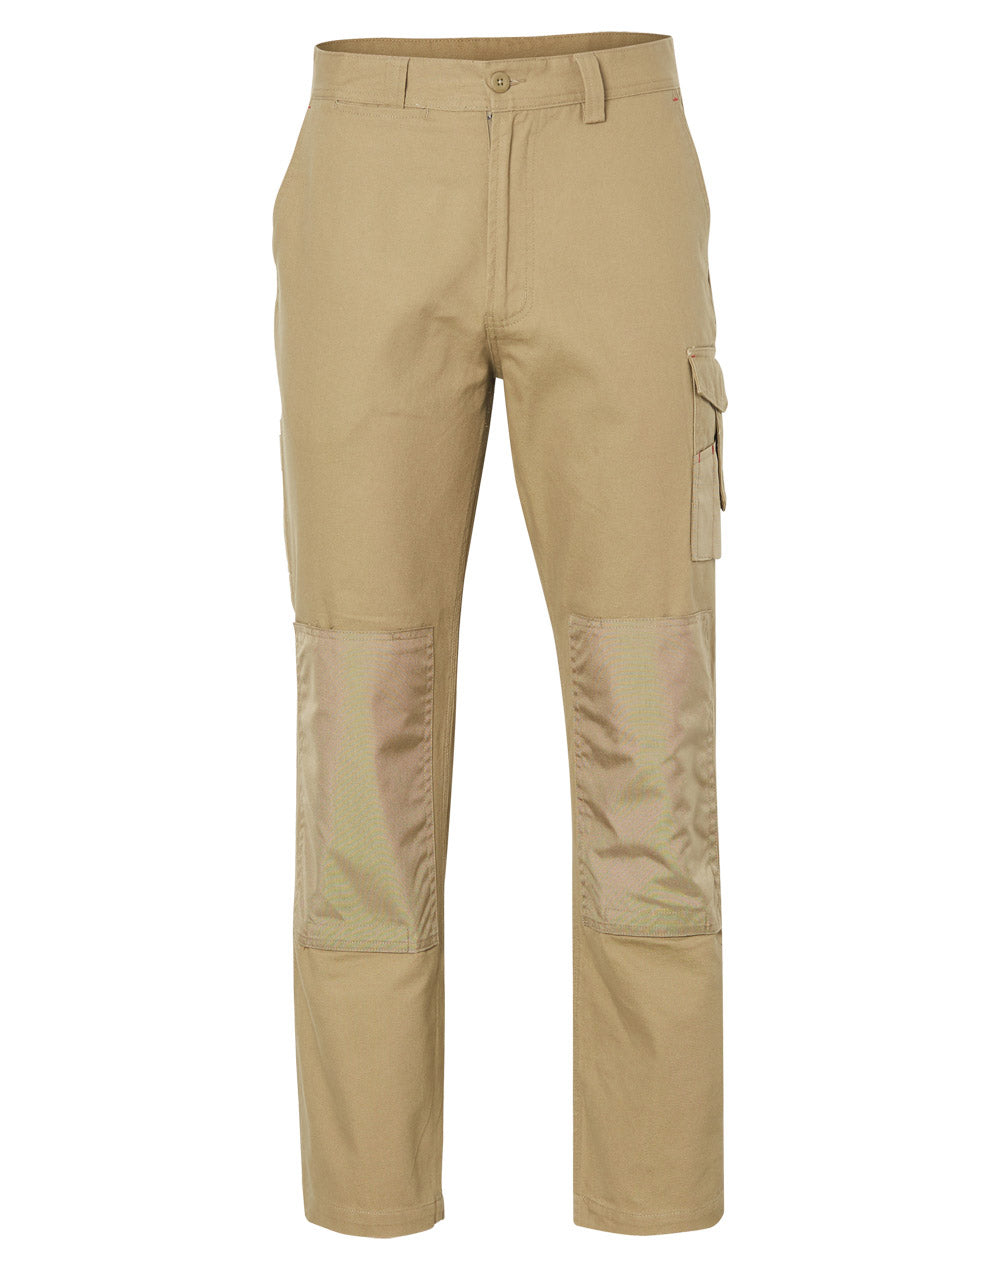 Drill Cargo Trouser Dura Wear - made by AIW